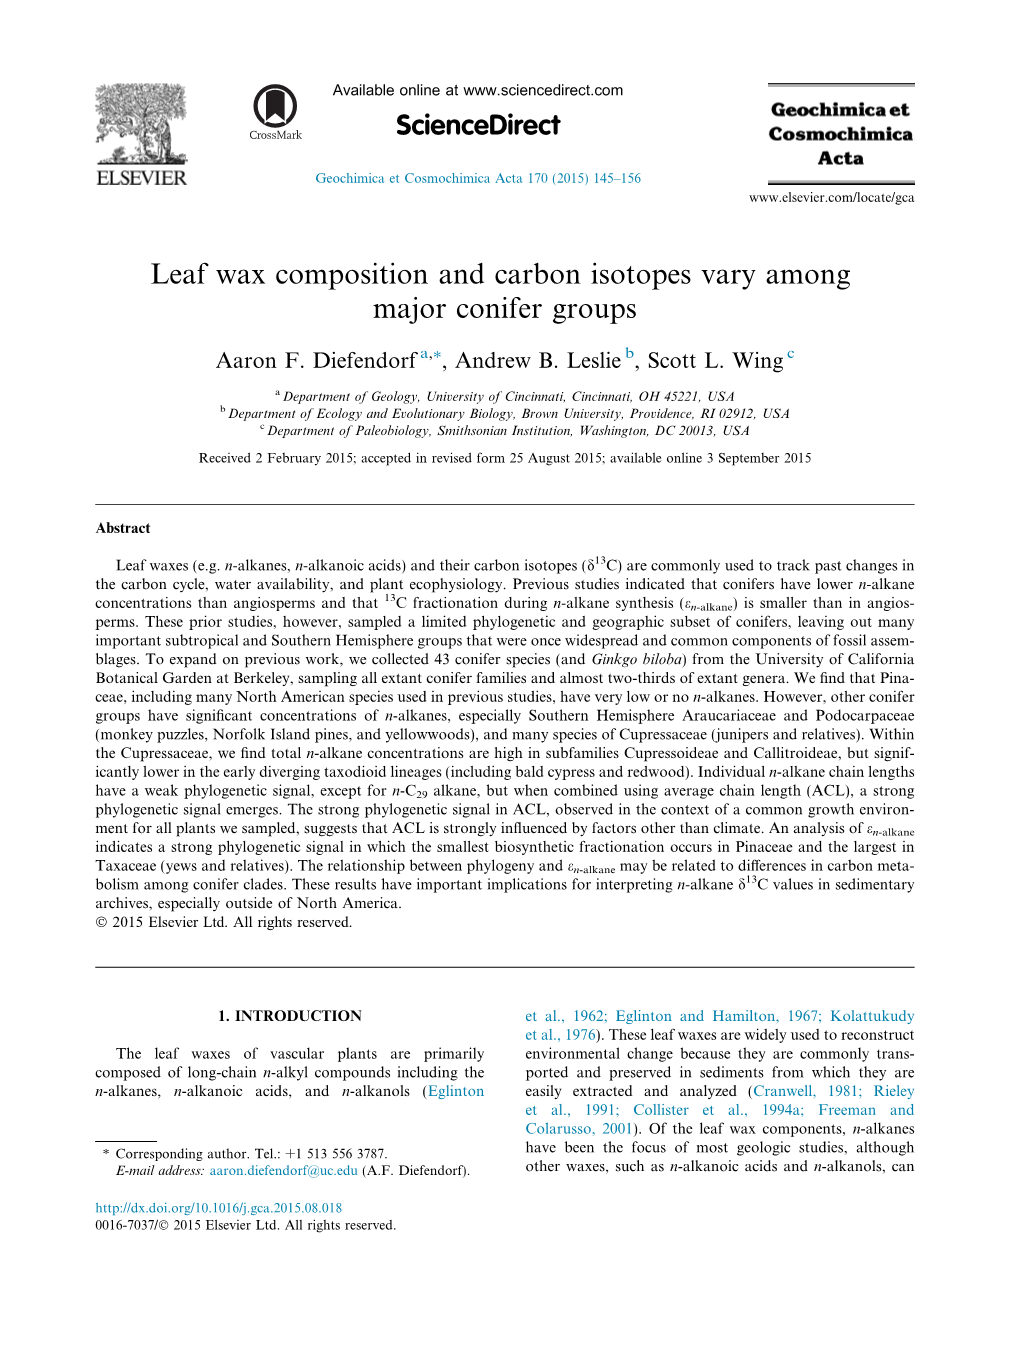 Leaf Wax Composition and Carbon Isotopes Vary Among Major Conifer Groups